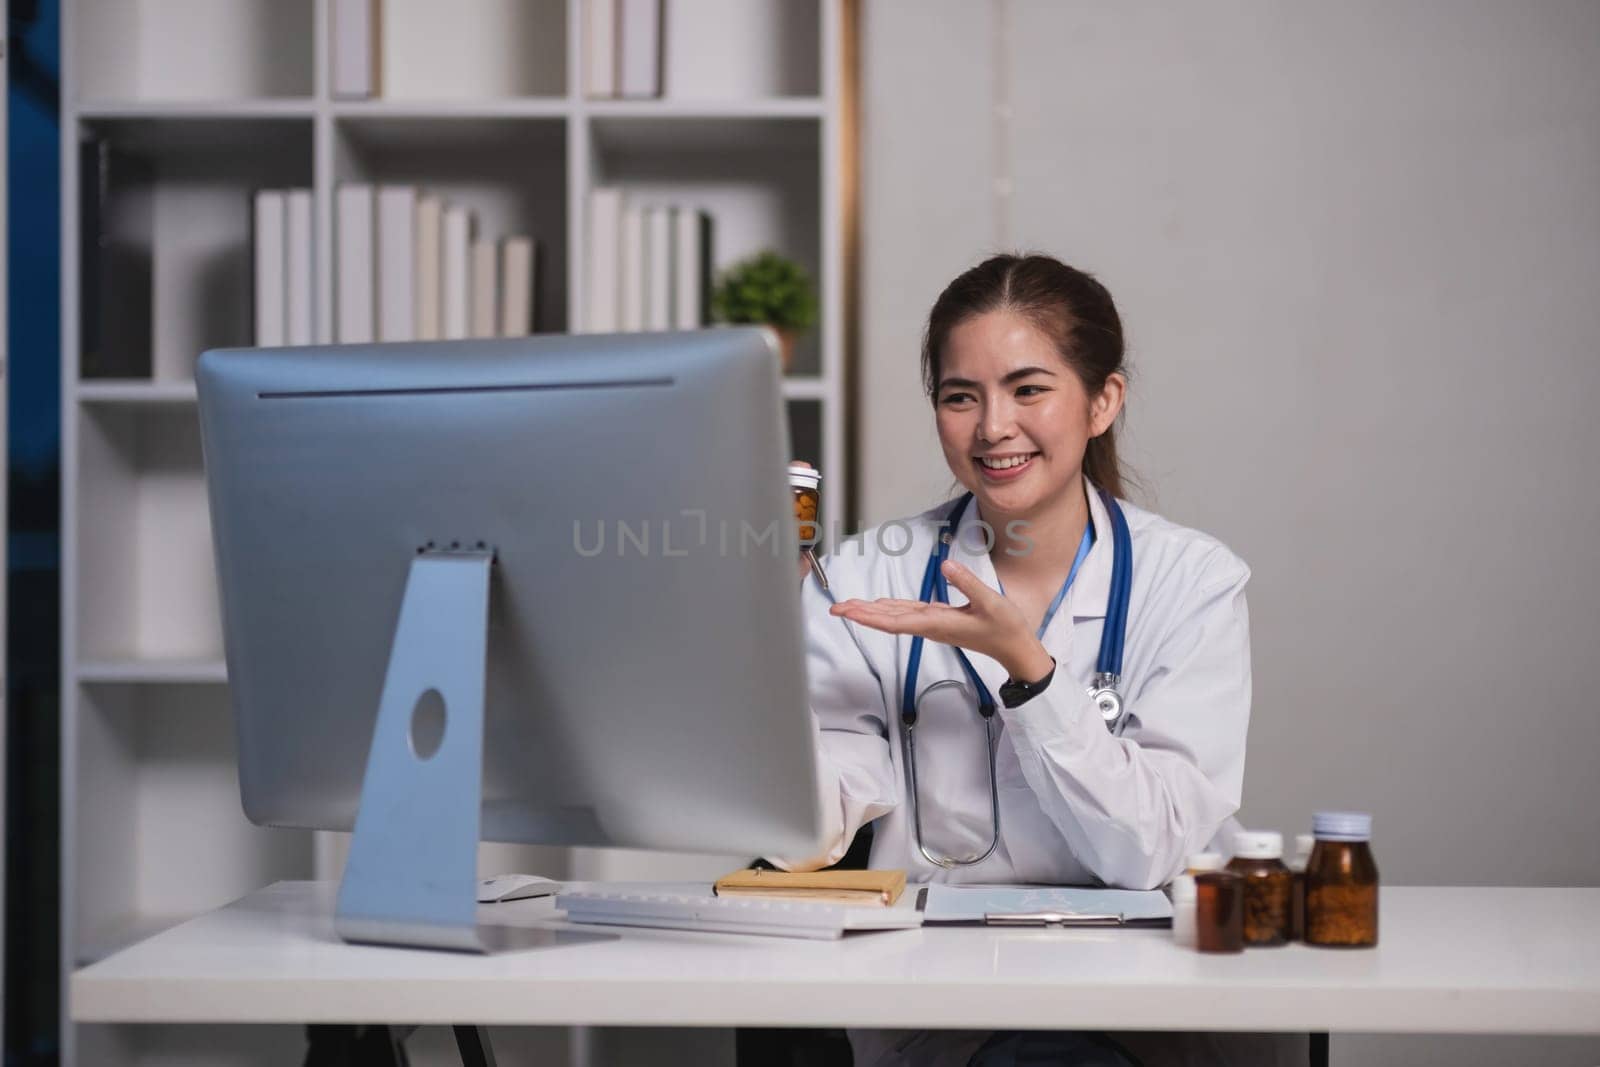 A woman in a white lab coat is sitting at a desk in front of a computer monitor. She is smiling and she is happy